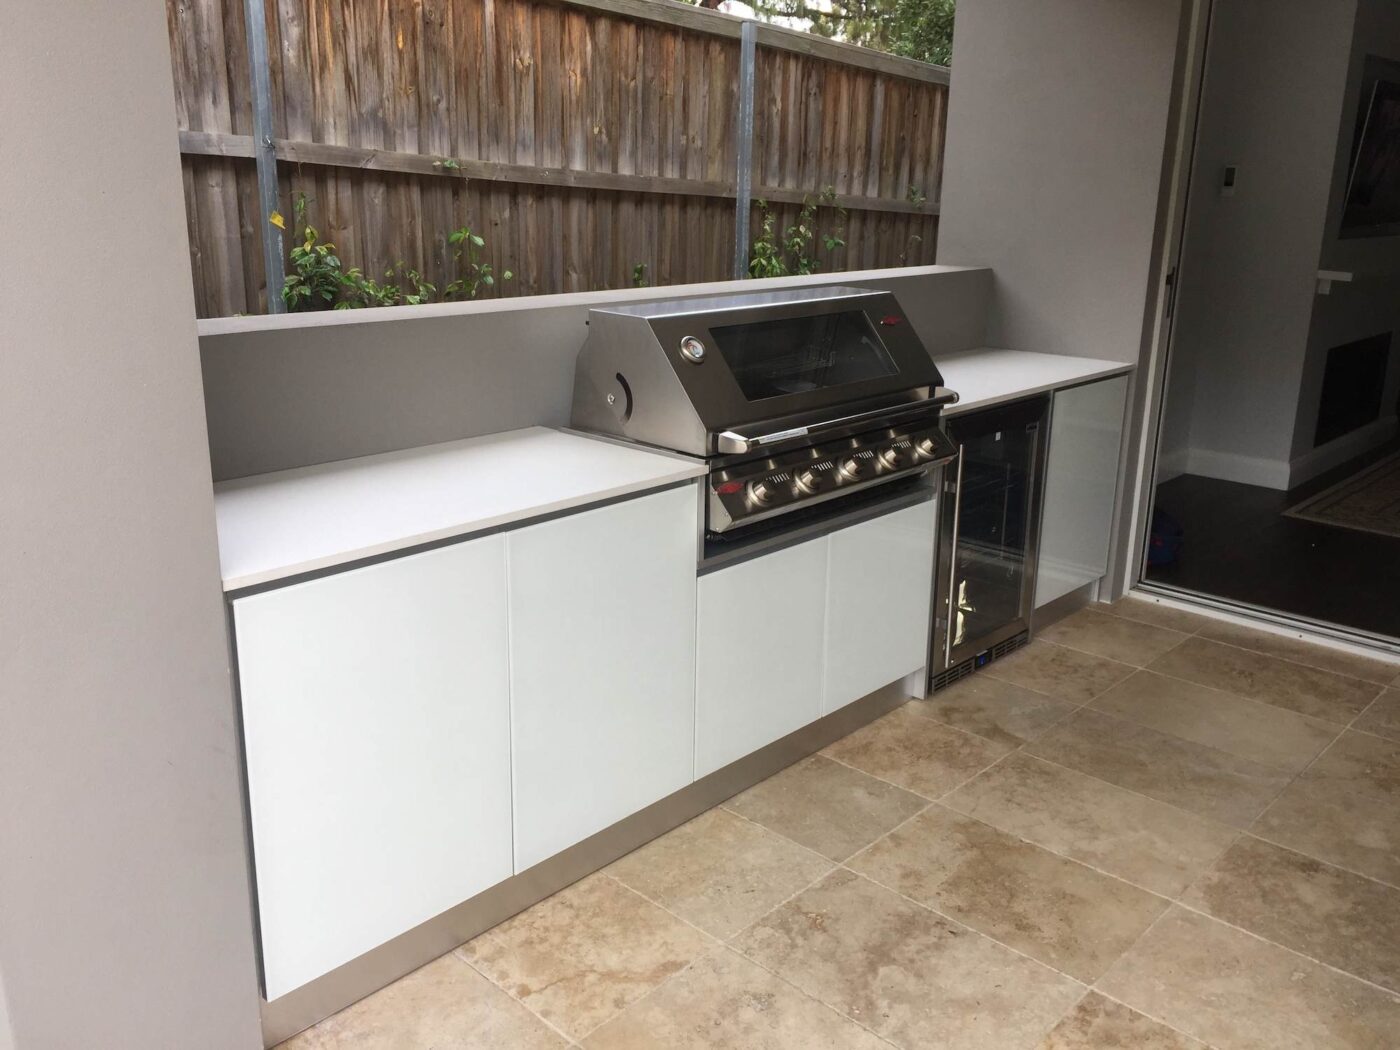 Full aluminium cabinets, with 5mm white tempered glass doors and 20mm Dekton bench tops in Nayla, complete with a Beefeater BBQ and Rhino Fridge.